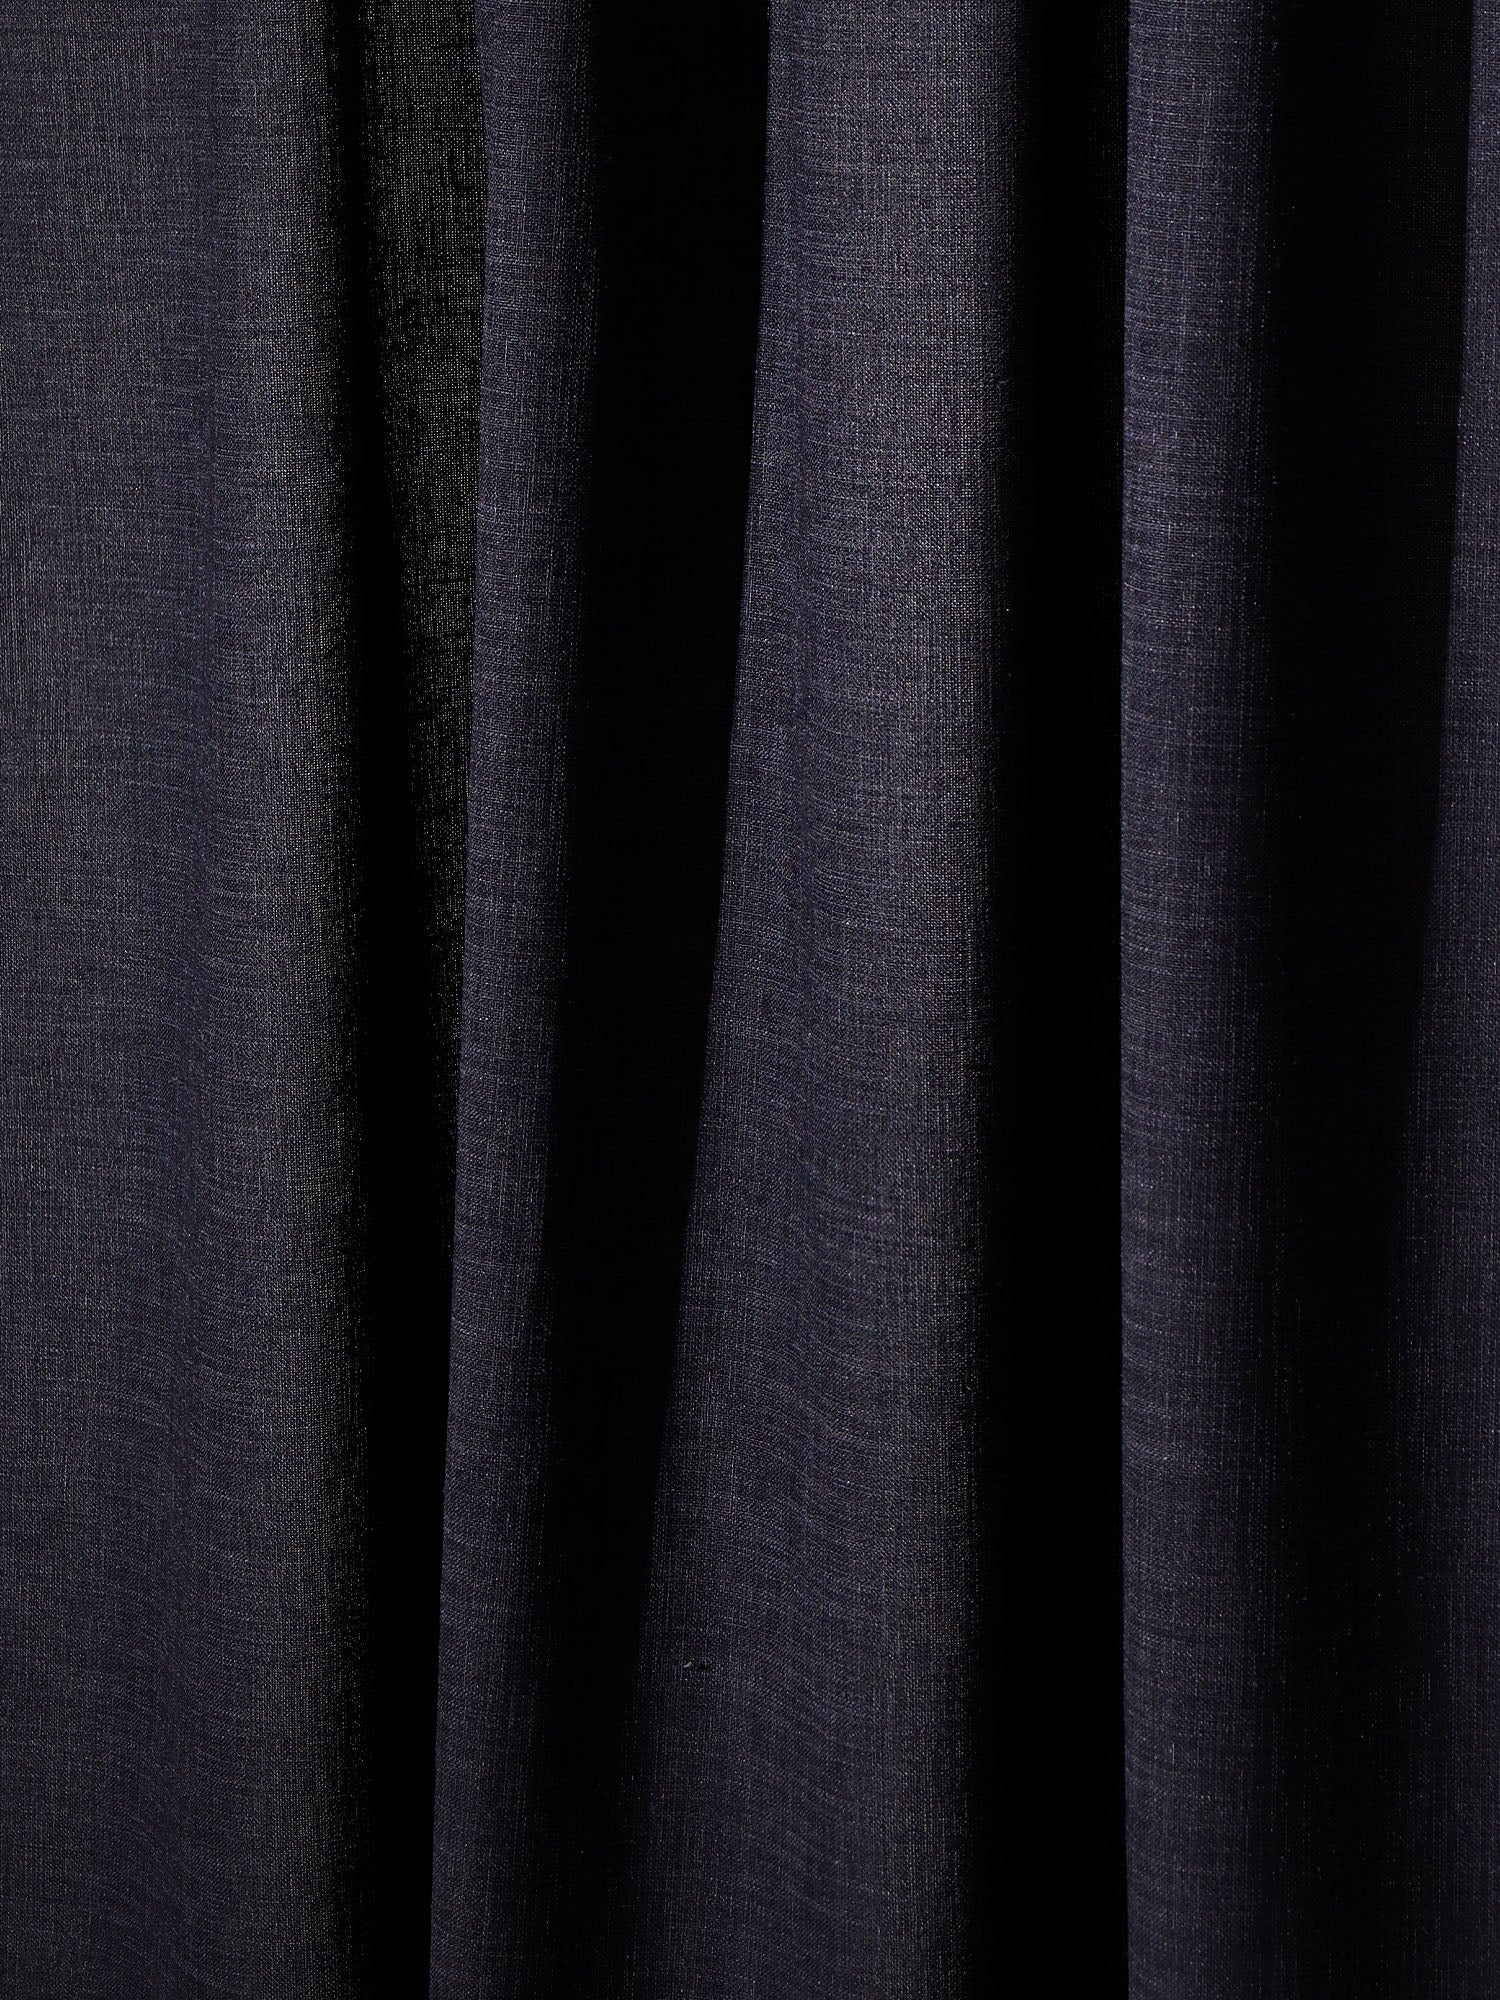 closeup of embroidered door curtains with rod pocket in dark blue color - 7 feet, 50x84 inch